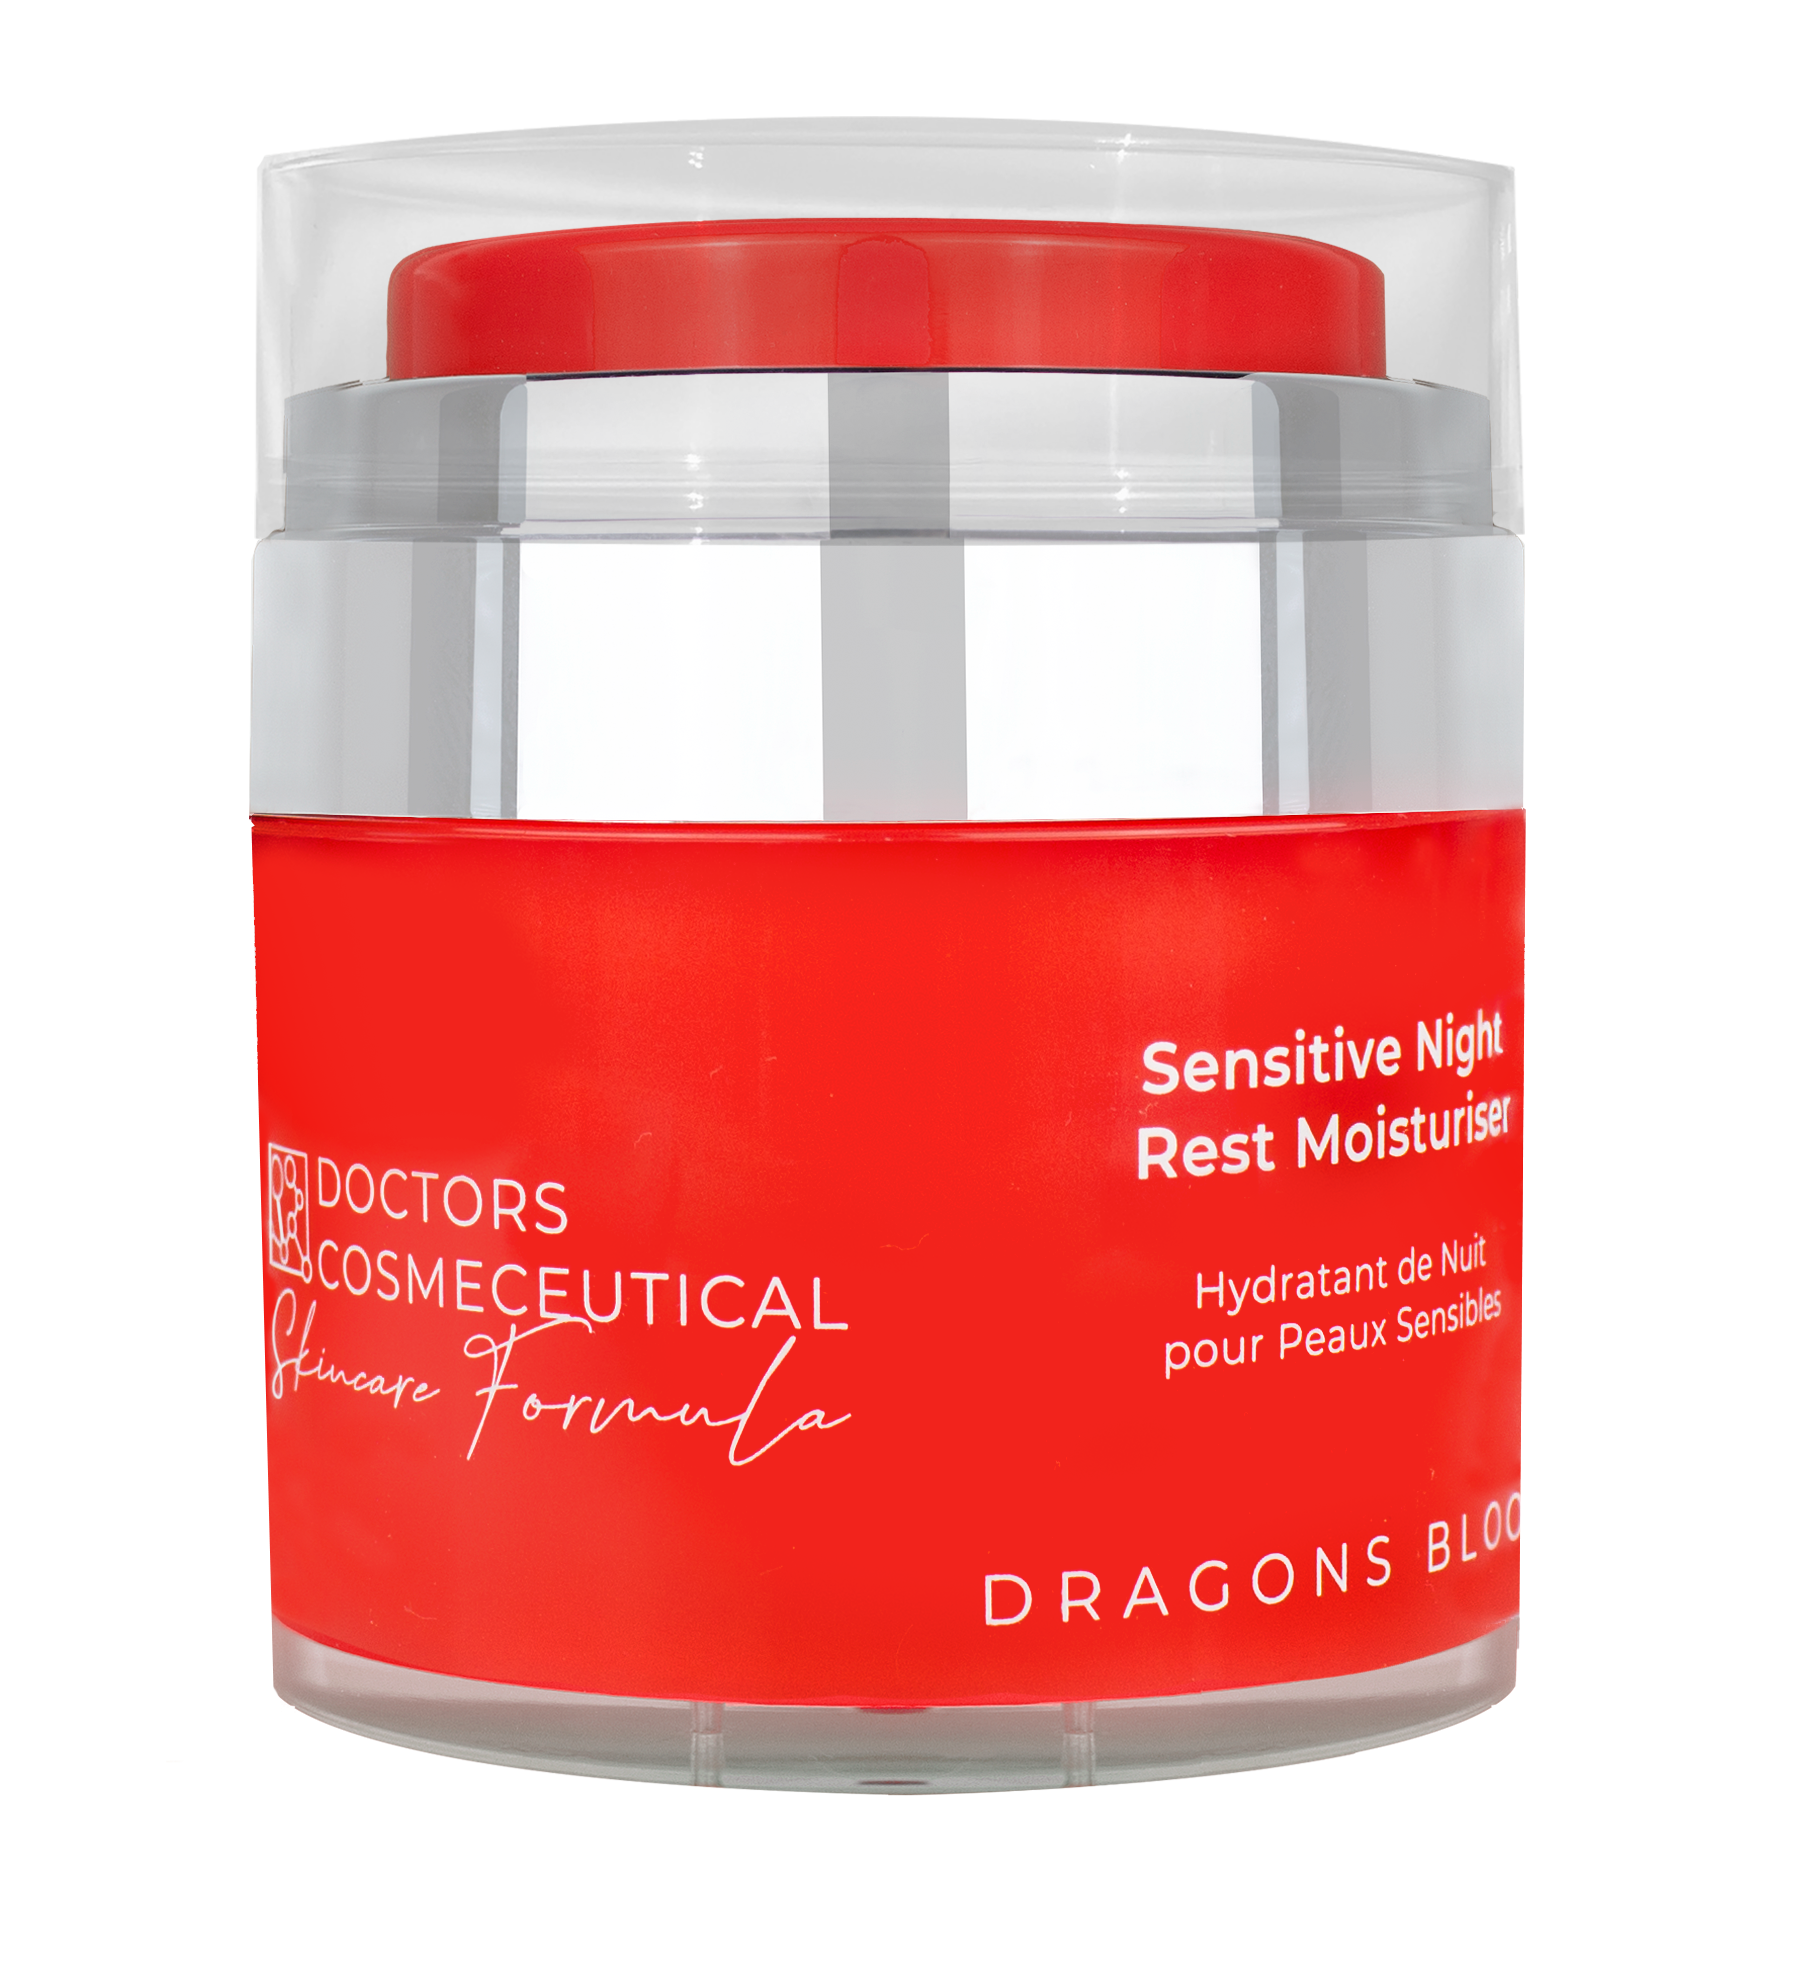 Dragons Blood Extract is a red resin, hence its name. The indigenous Amazonian communities have been using it for thousands of years for its healing, anti-bacterial and antiviral properties. At Doctors Cosmeceutical skincare we’ve fused with active ingredients to soothe, smooth, and support, whilst rejuvenating stressed looking skin. Dragons Blood is a hydro-glycolic extract obtained from the latex of the tree Croton lechleri, with multiple beneficial properties for skin care treatments.

Dragons Blood Sensitive Anti-Bac Cleanser 100ml
Dragons Blood Sensitive Night Rest Moisturiser 50ml
Dragons Blood Sensitive Anti-Bac Daily Moisturiser 50ml